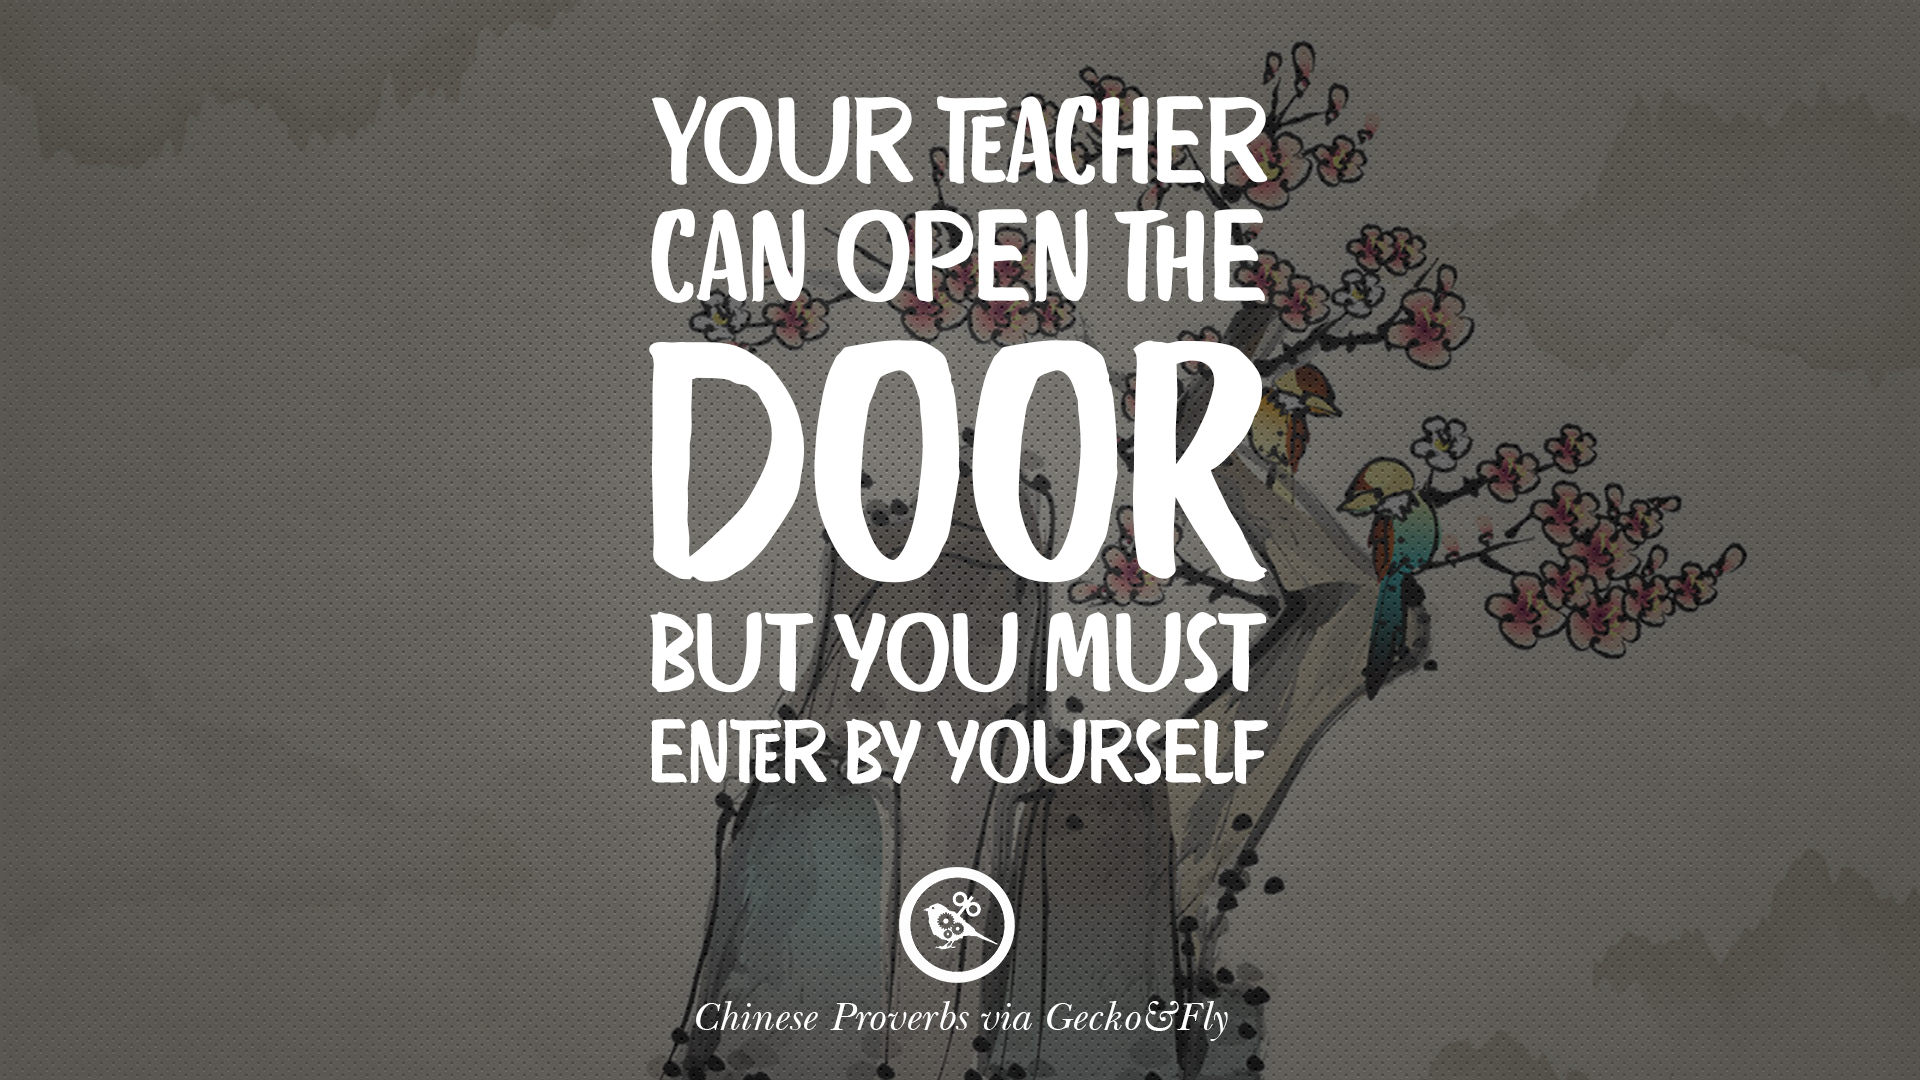 Your teacher can open the door but you must enter by yourself